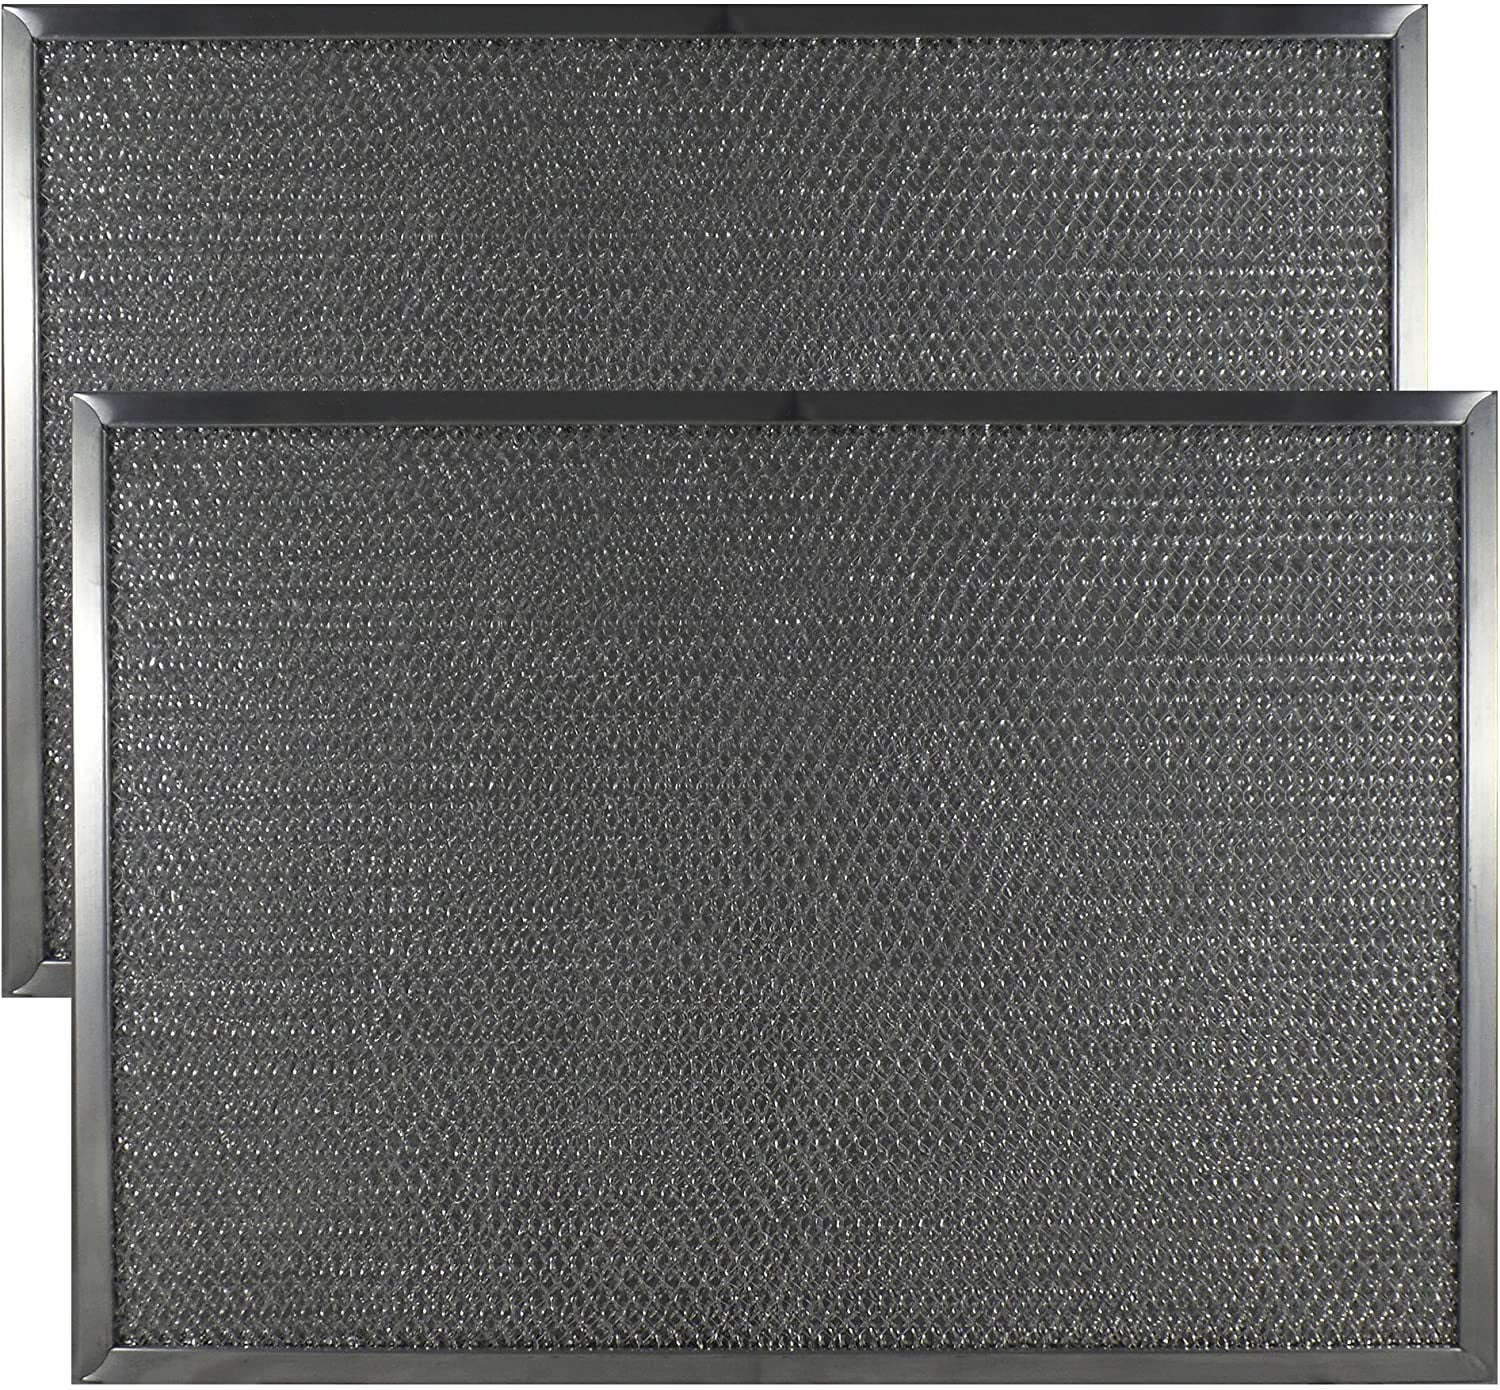 2 PK COMPATIBLE GE JX81C WB02X10776 WB2X10776 CHARCOAL CARBON MICROWAVE FILTERS 